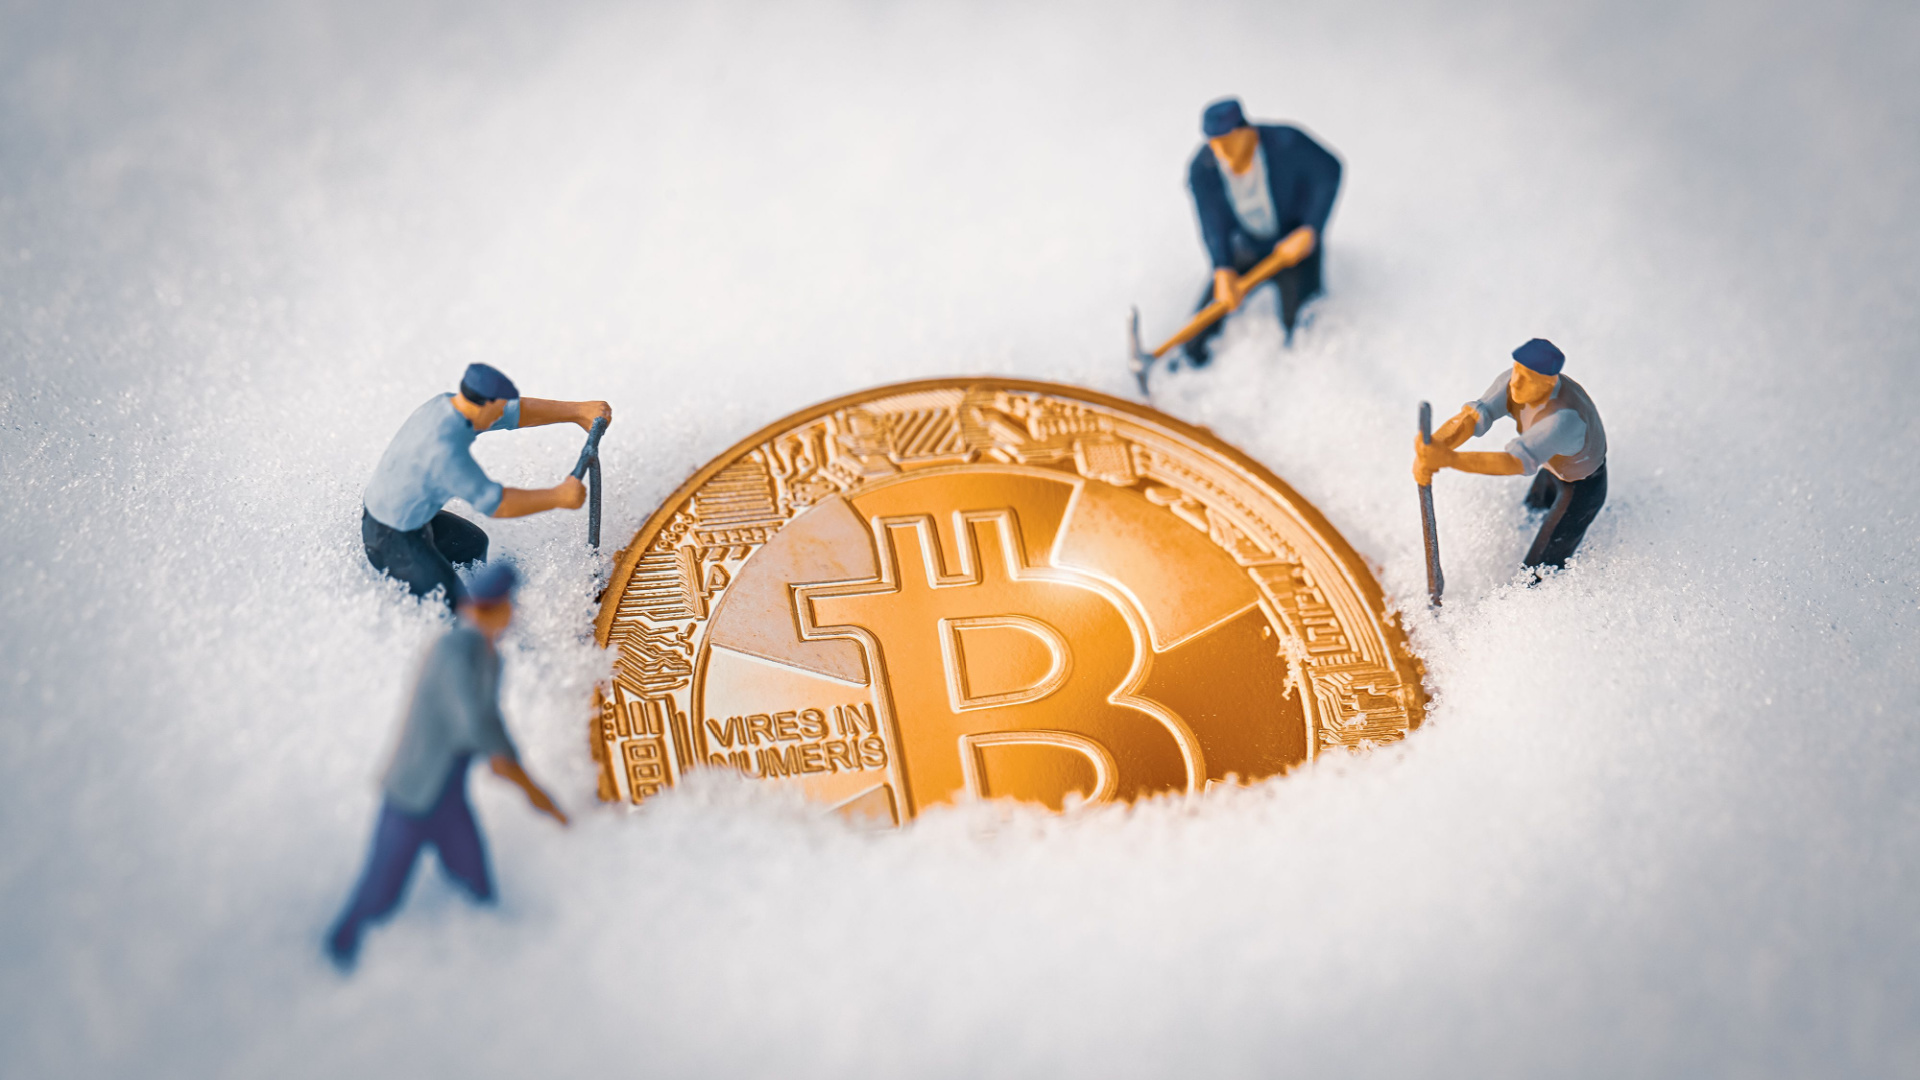 Binance vs crypto winter – 0M to support Bitcoin miners